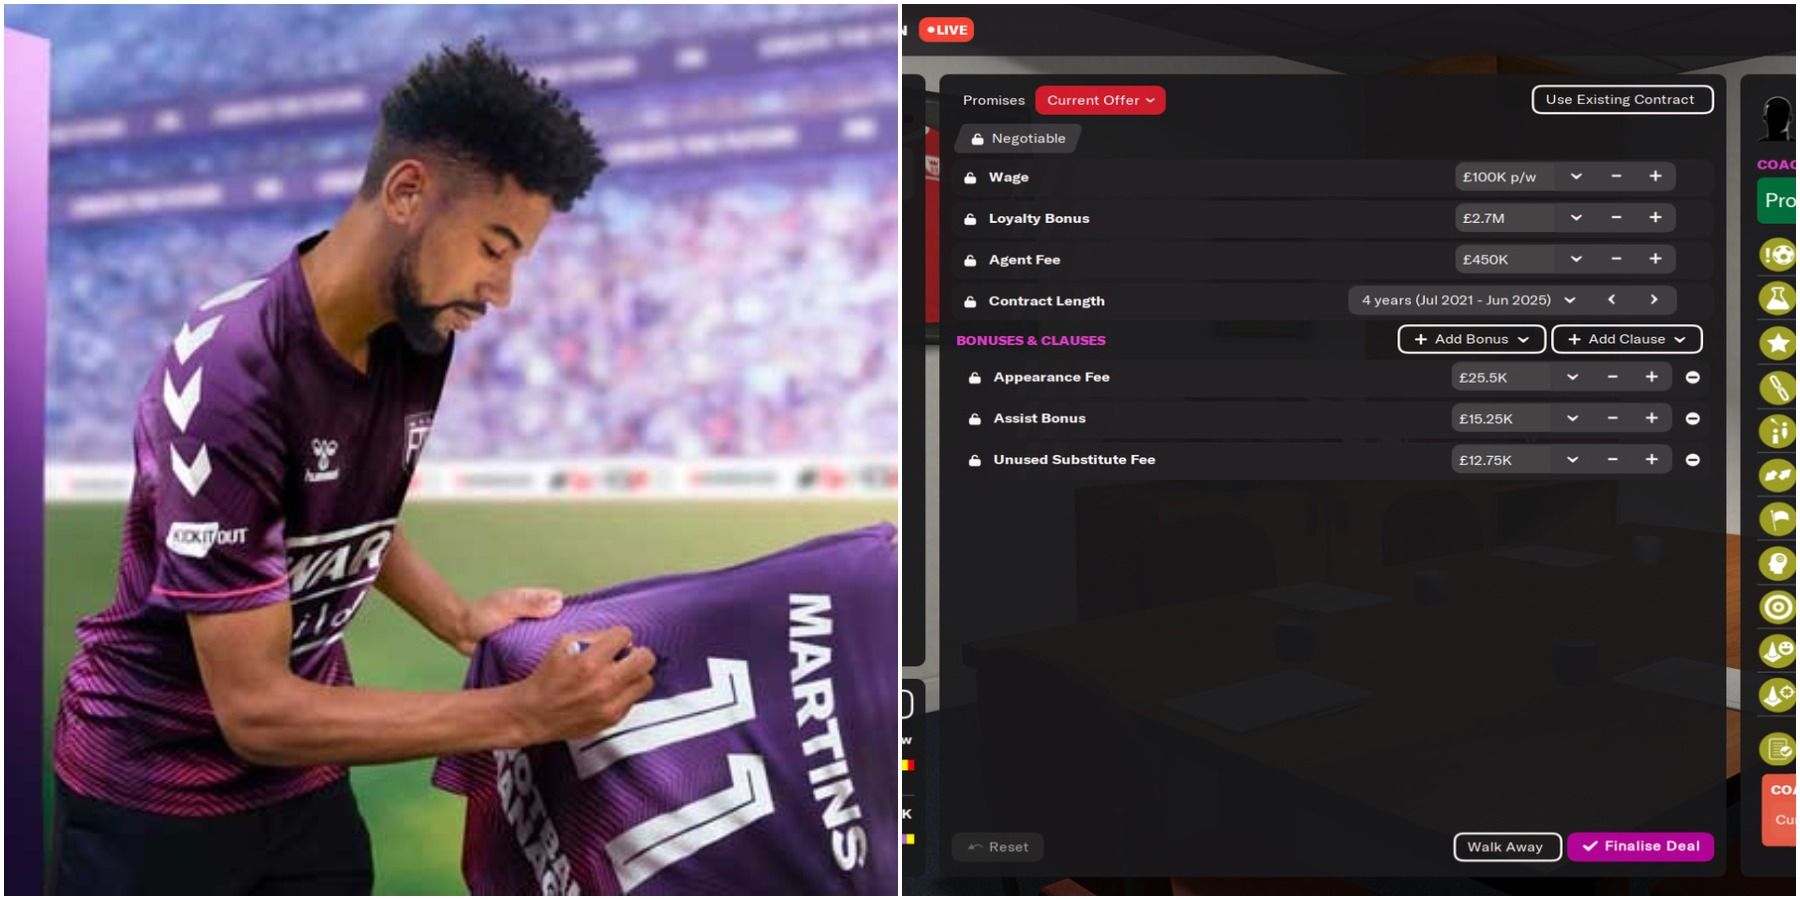 (Left) Player signing a shirt (Right) Contract offer details